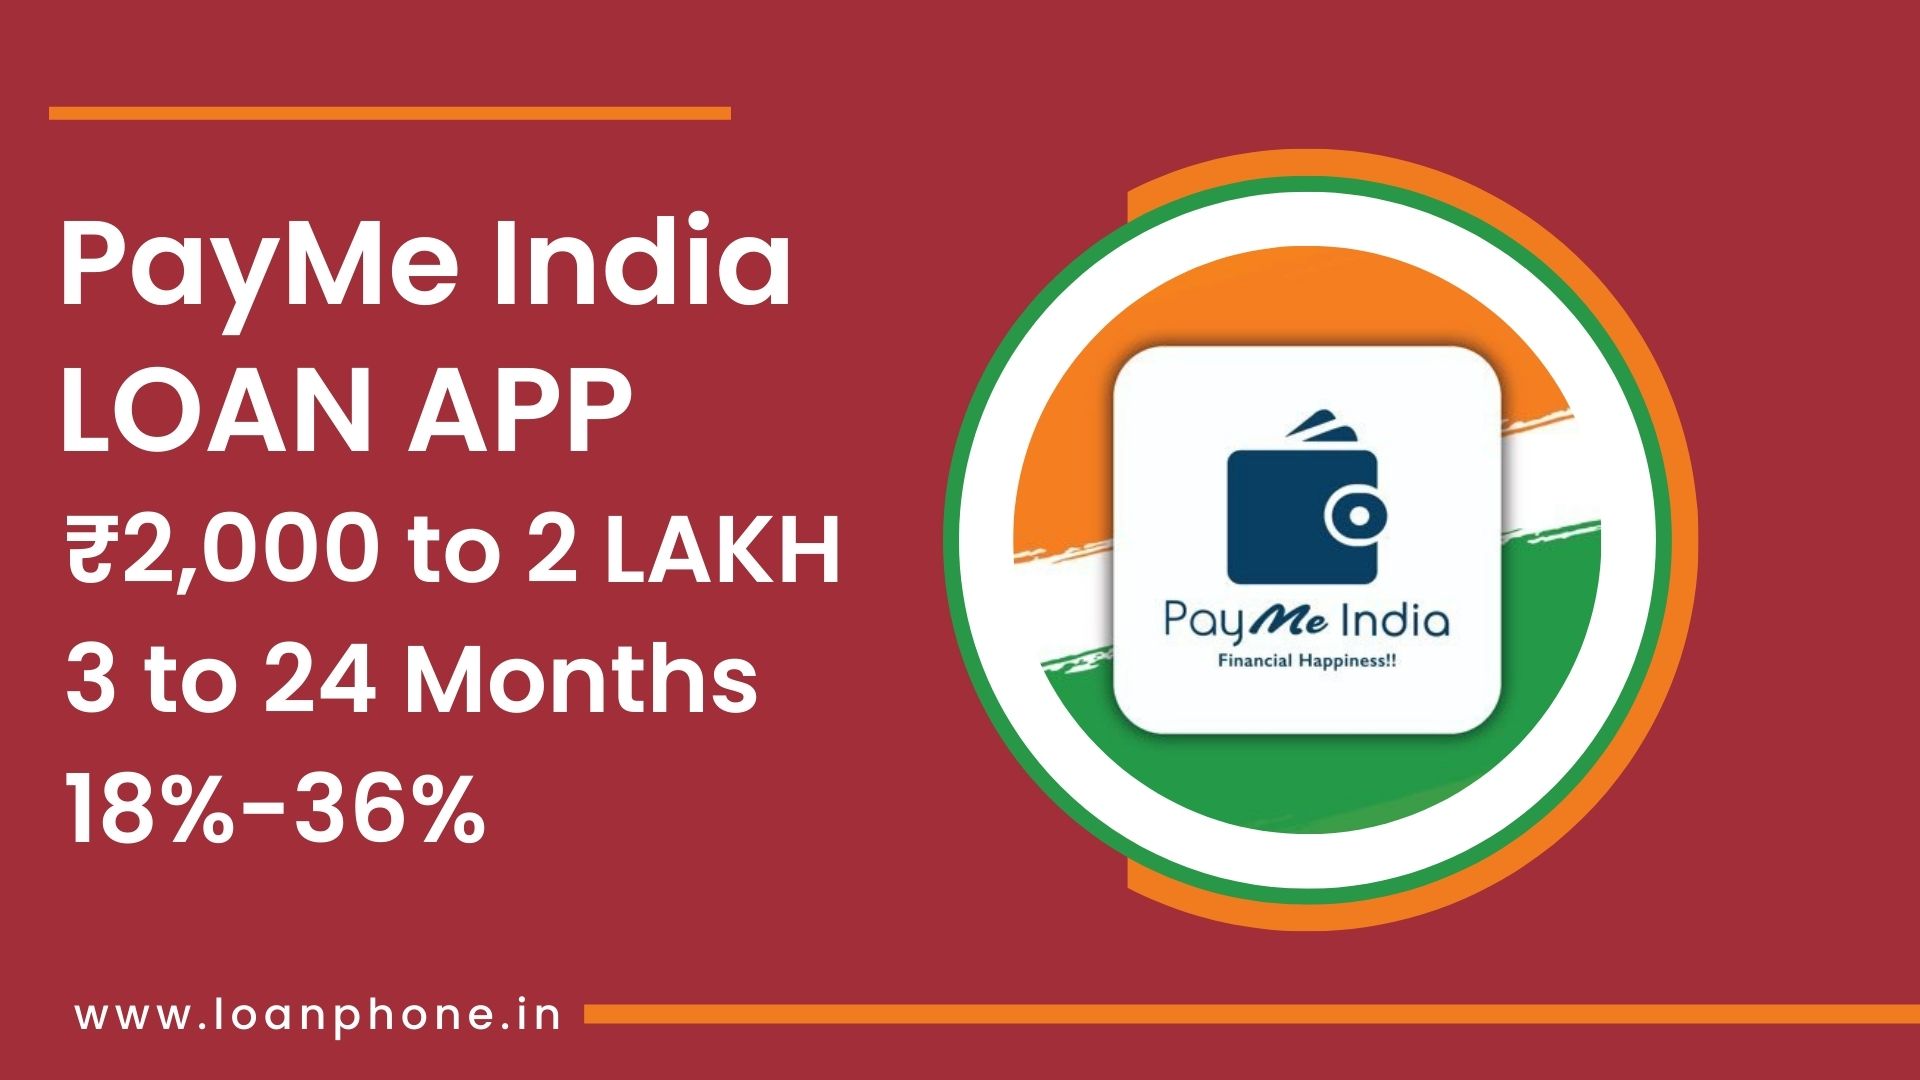 PayMe India Loan App Apply Online | PayMe India Loan Interest